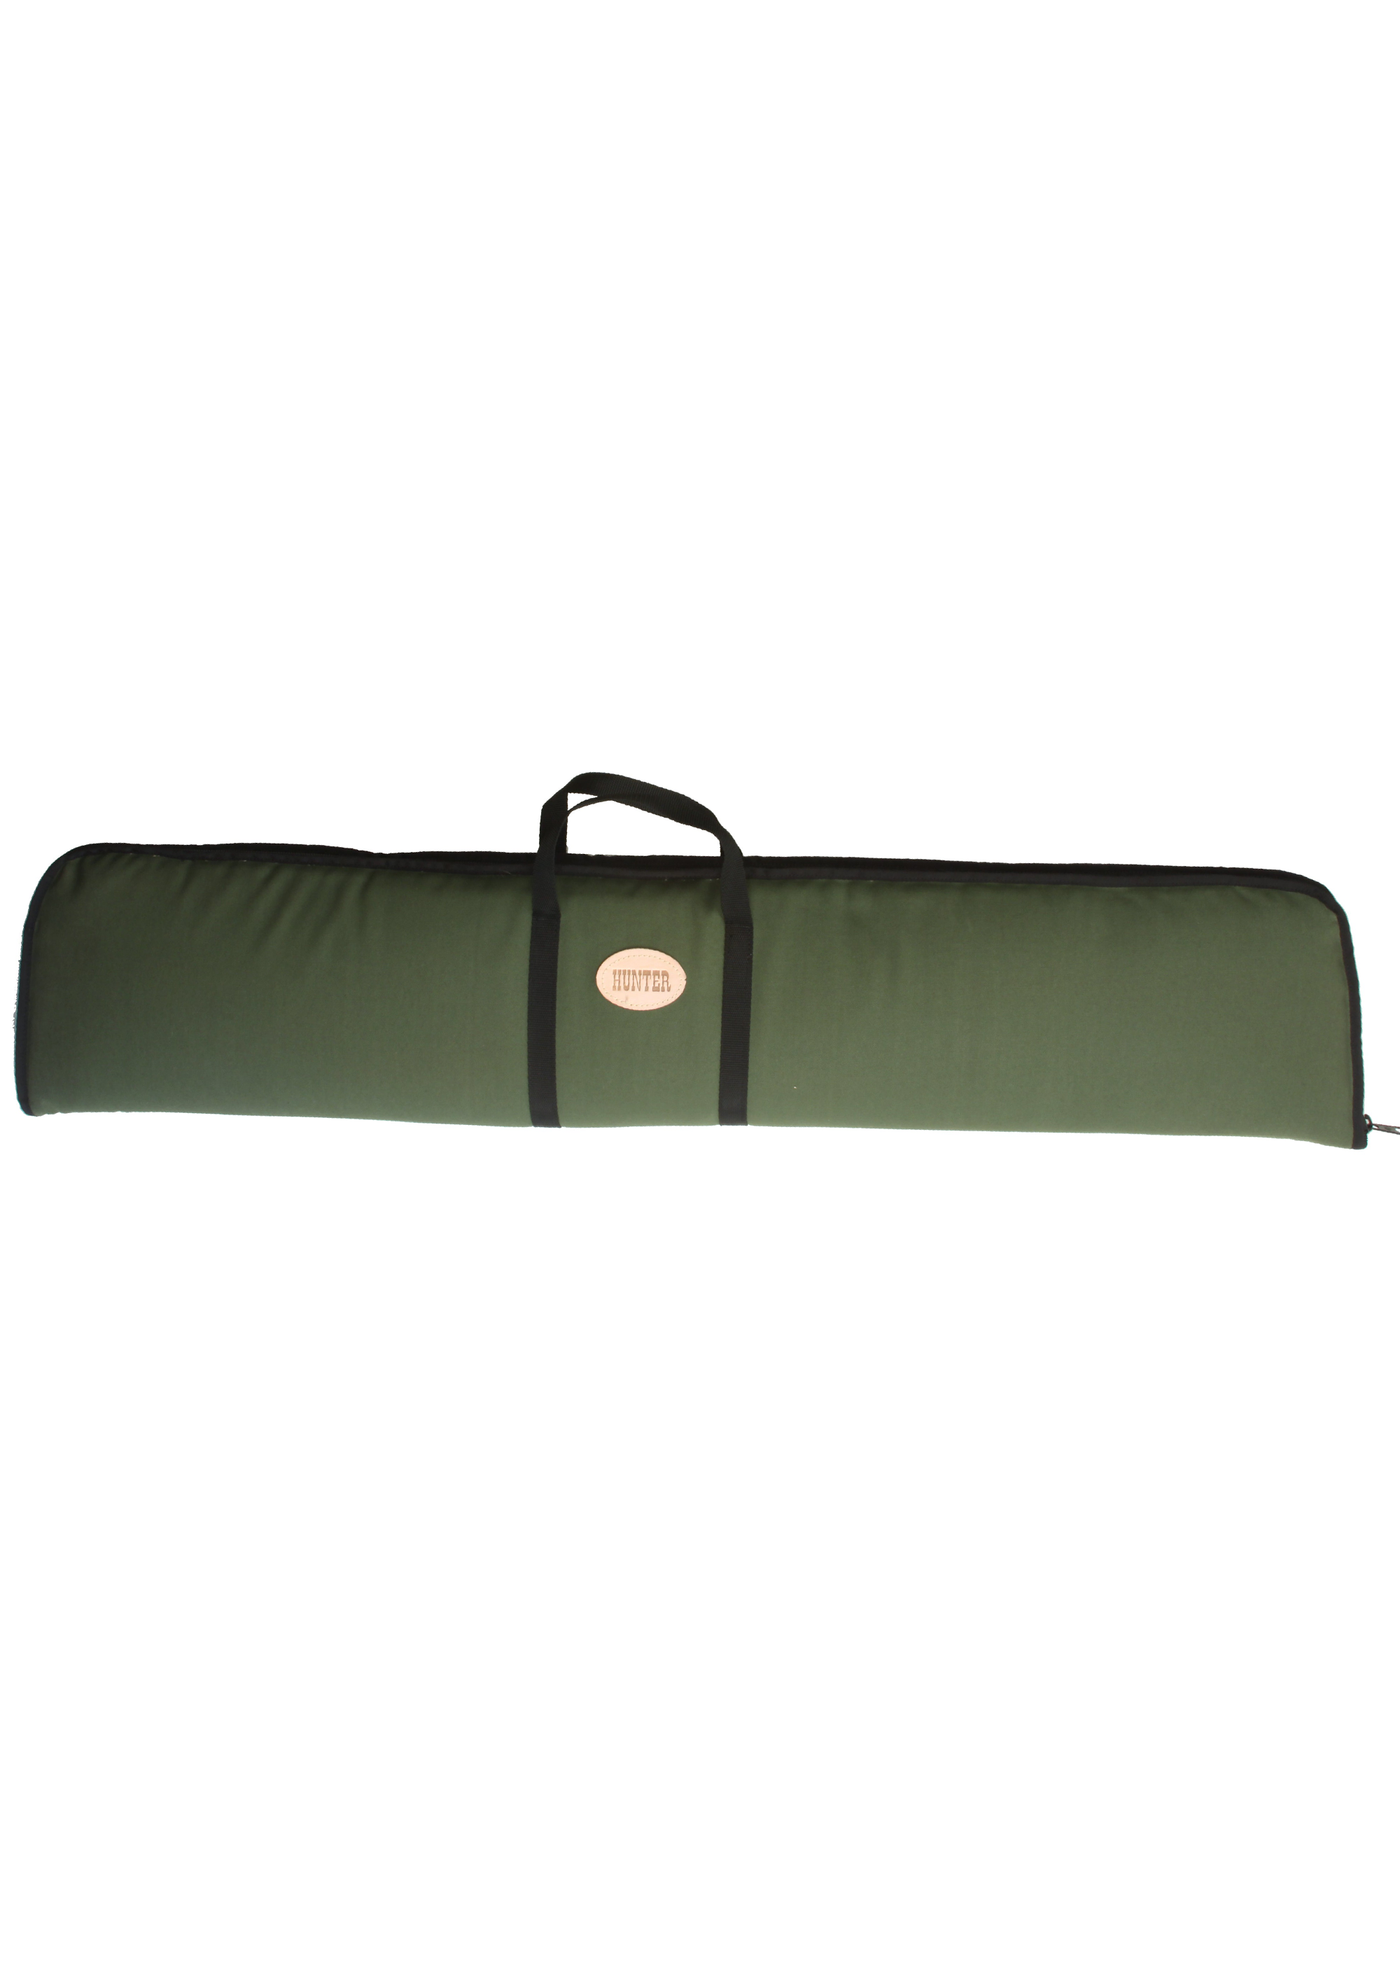 Canvas Long Gun Case with Fold Out Rest